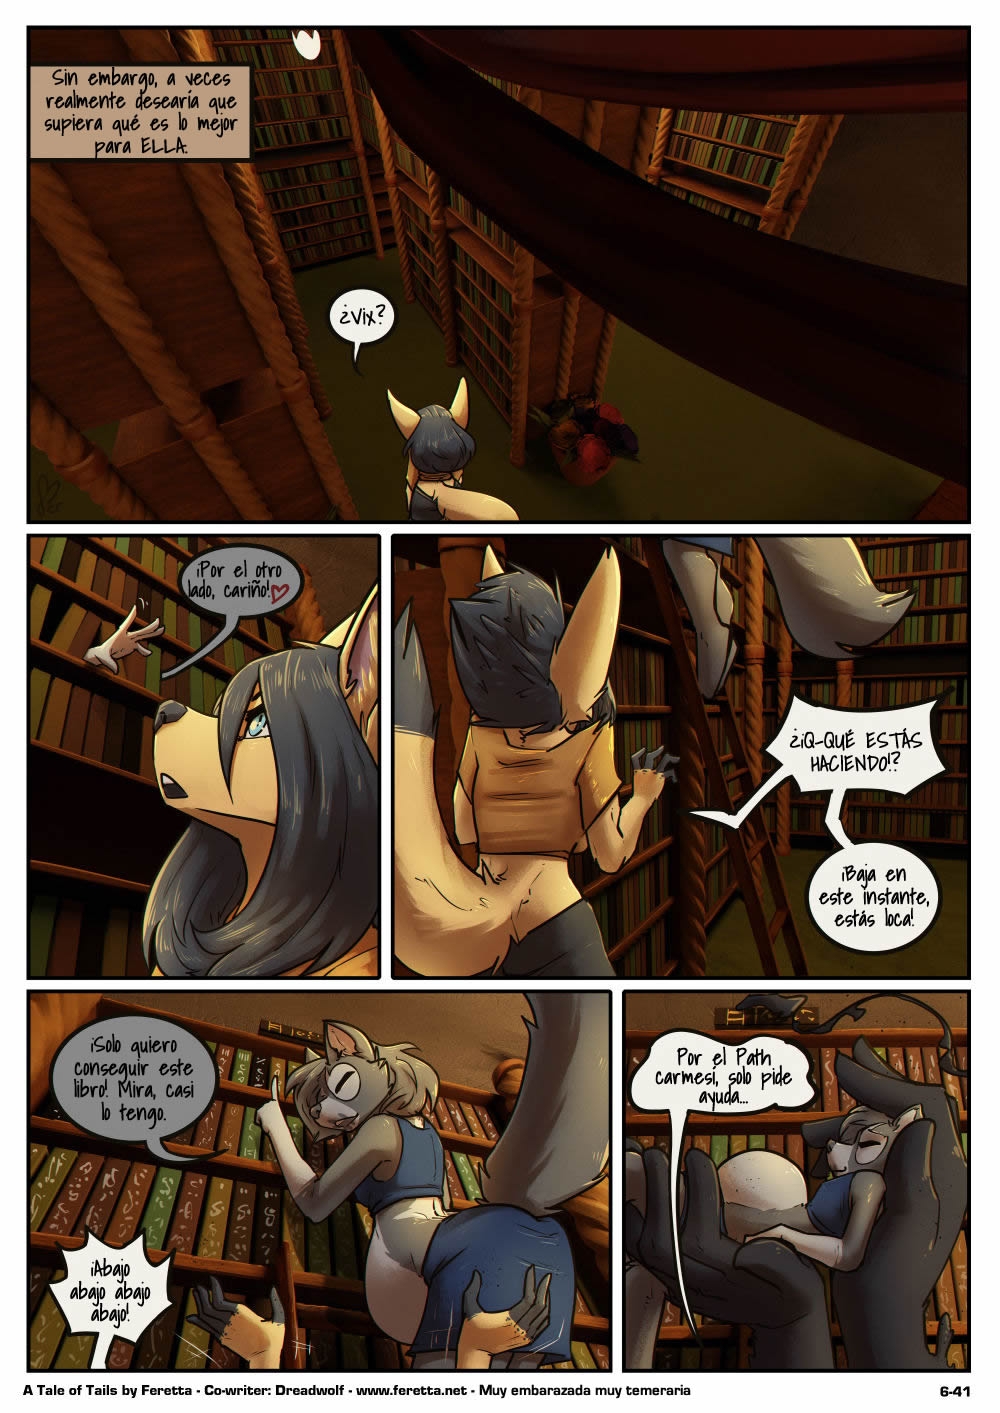 [Feretta] A Tale of Tails: Chapter 6 - Paths converge / Los caminos convergen [Spanish] [Red Fox Makkan] 41